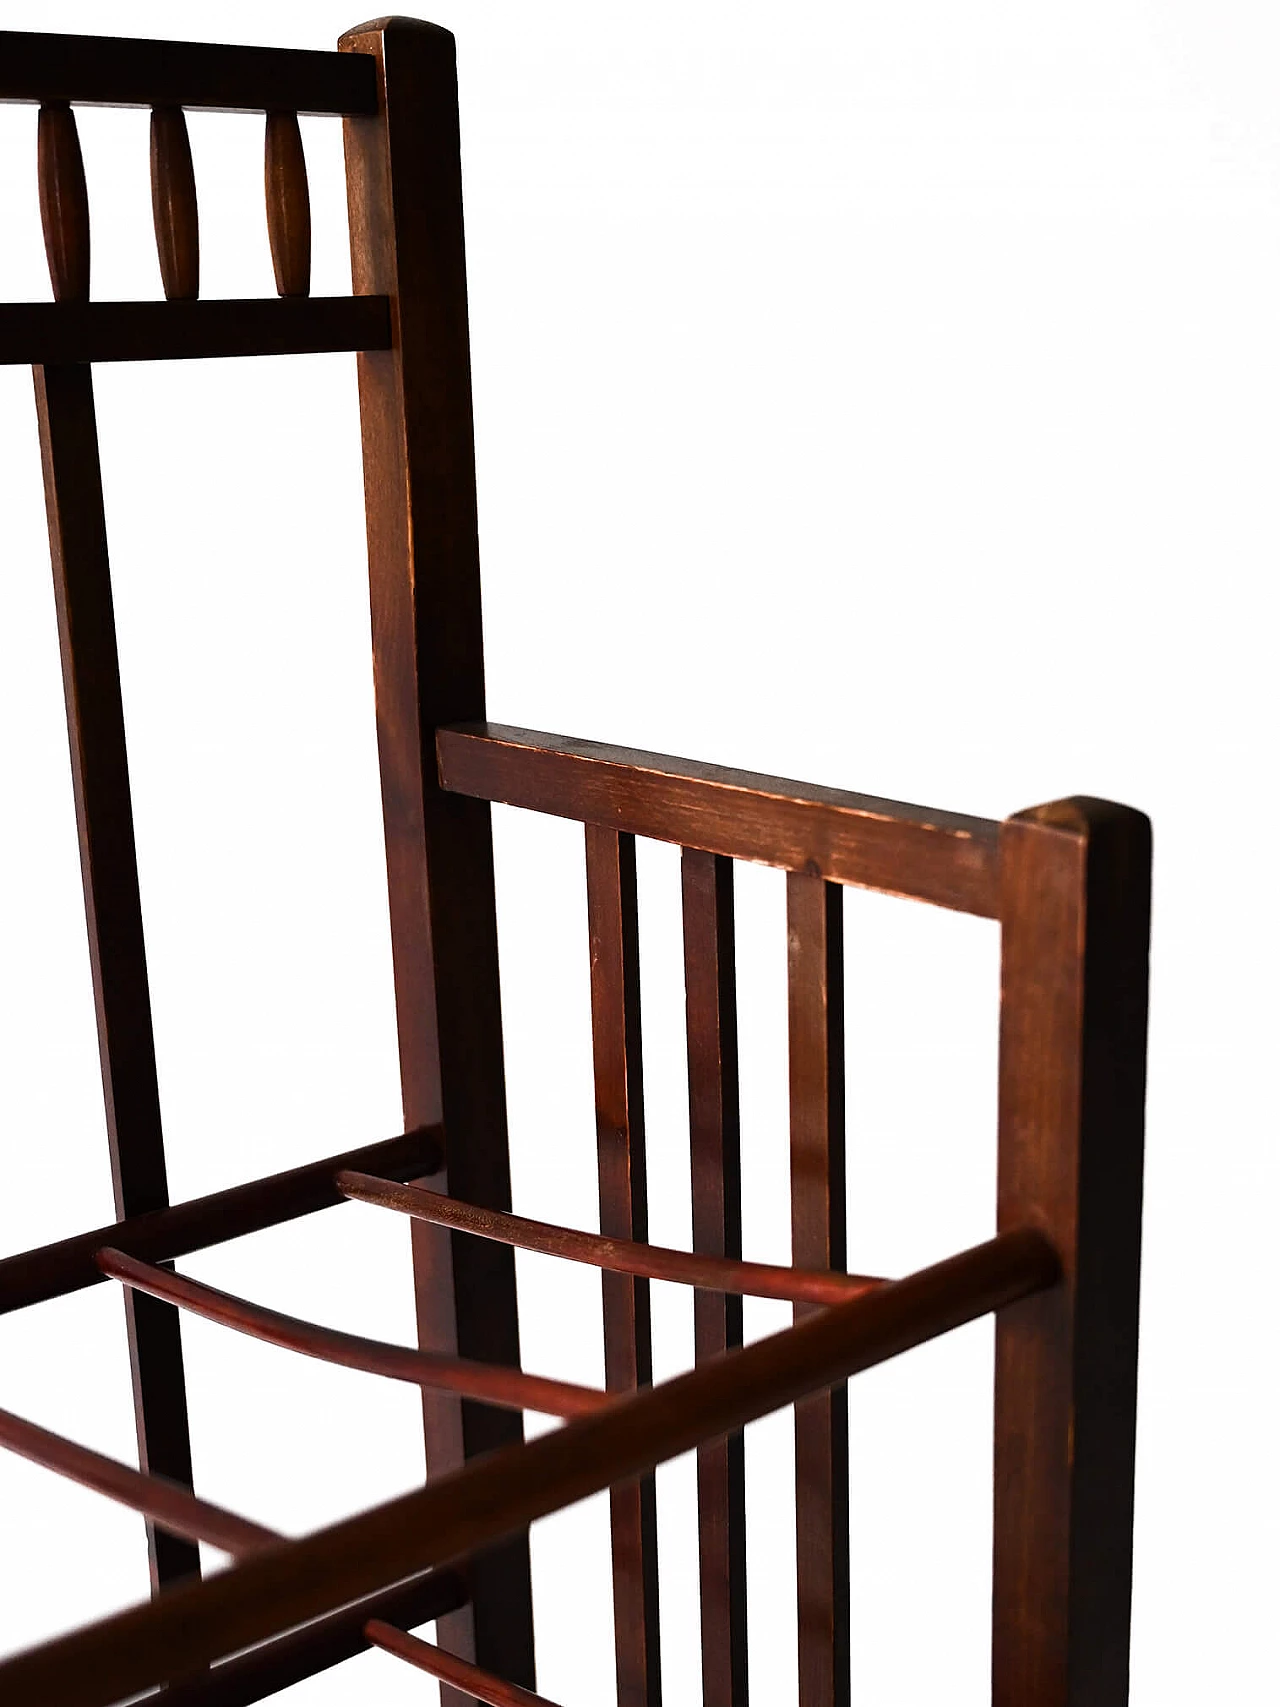 Jugend wooden magazine rack with three shelves, 1940s 8